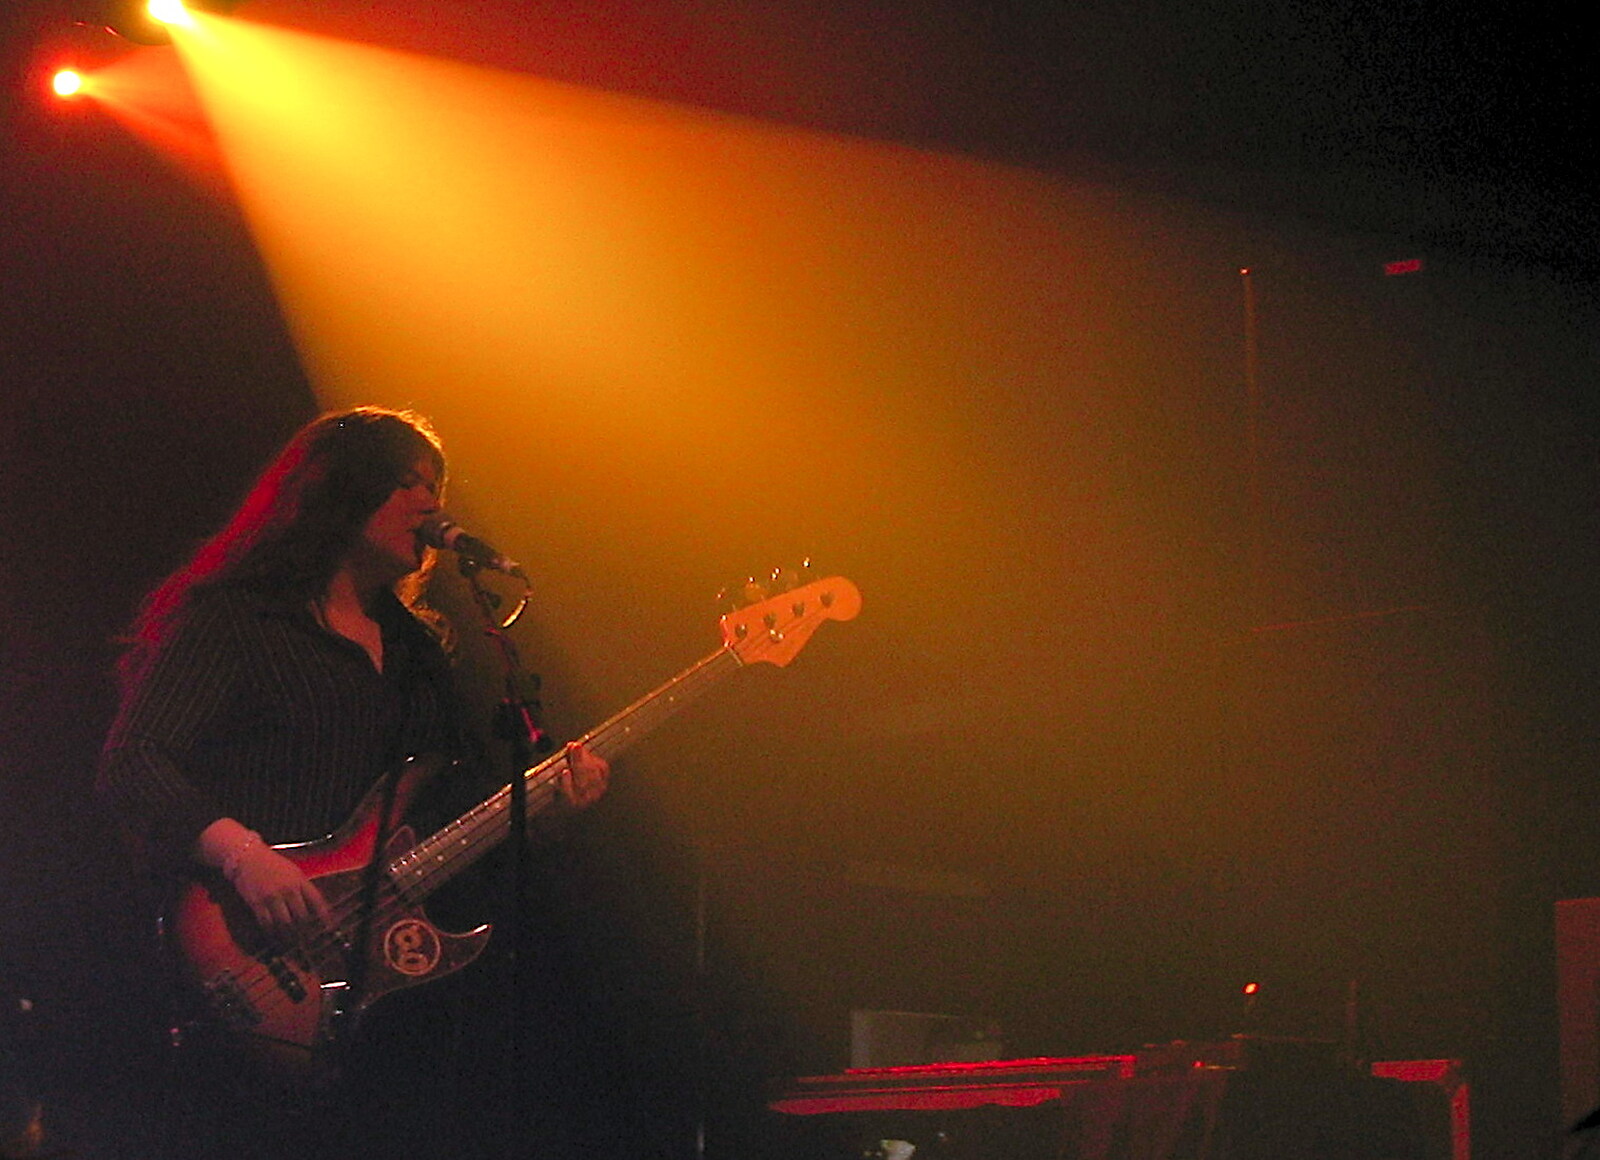 Michelle Stoddart on bass from The Magic Numbers and Scenes of Diss, Norfolk - 15th October 2005